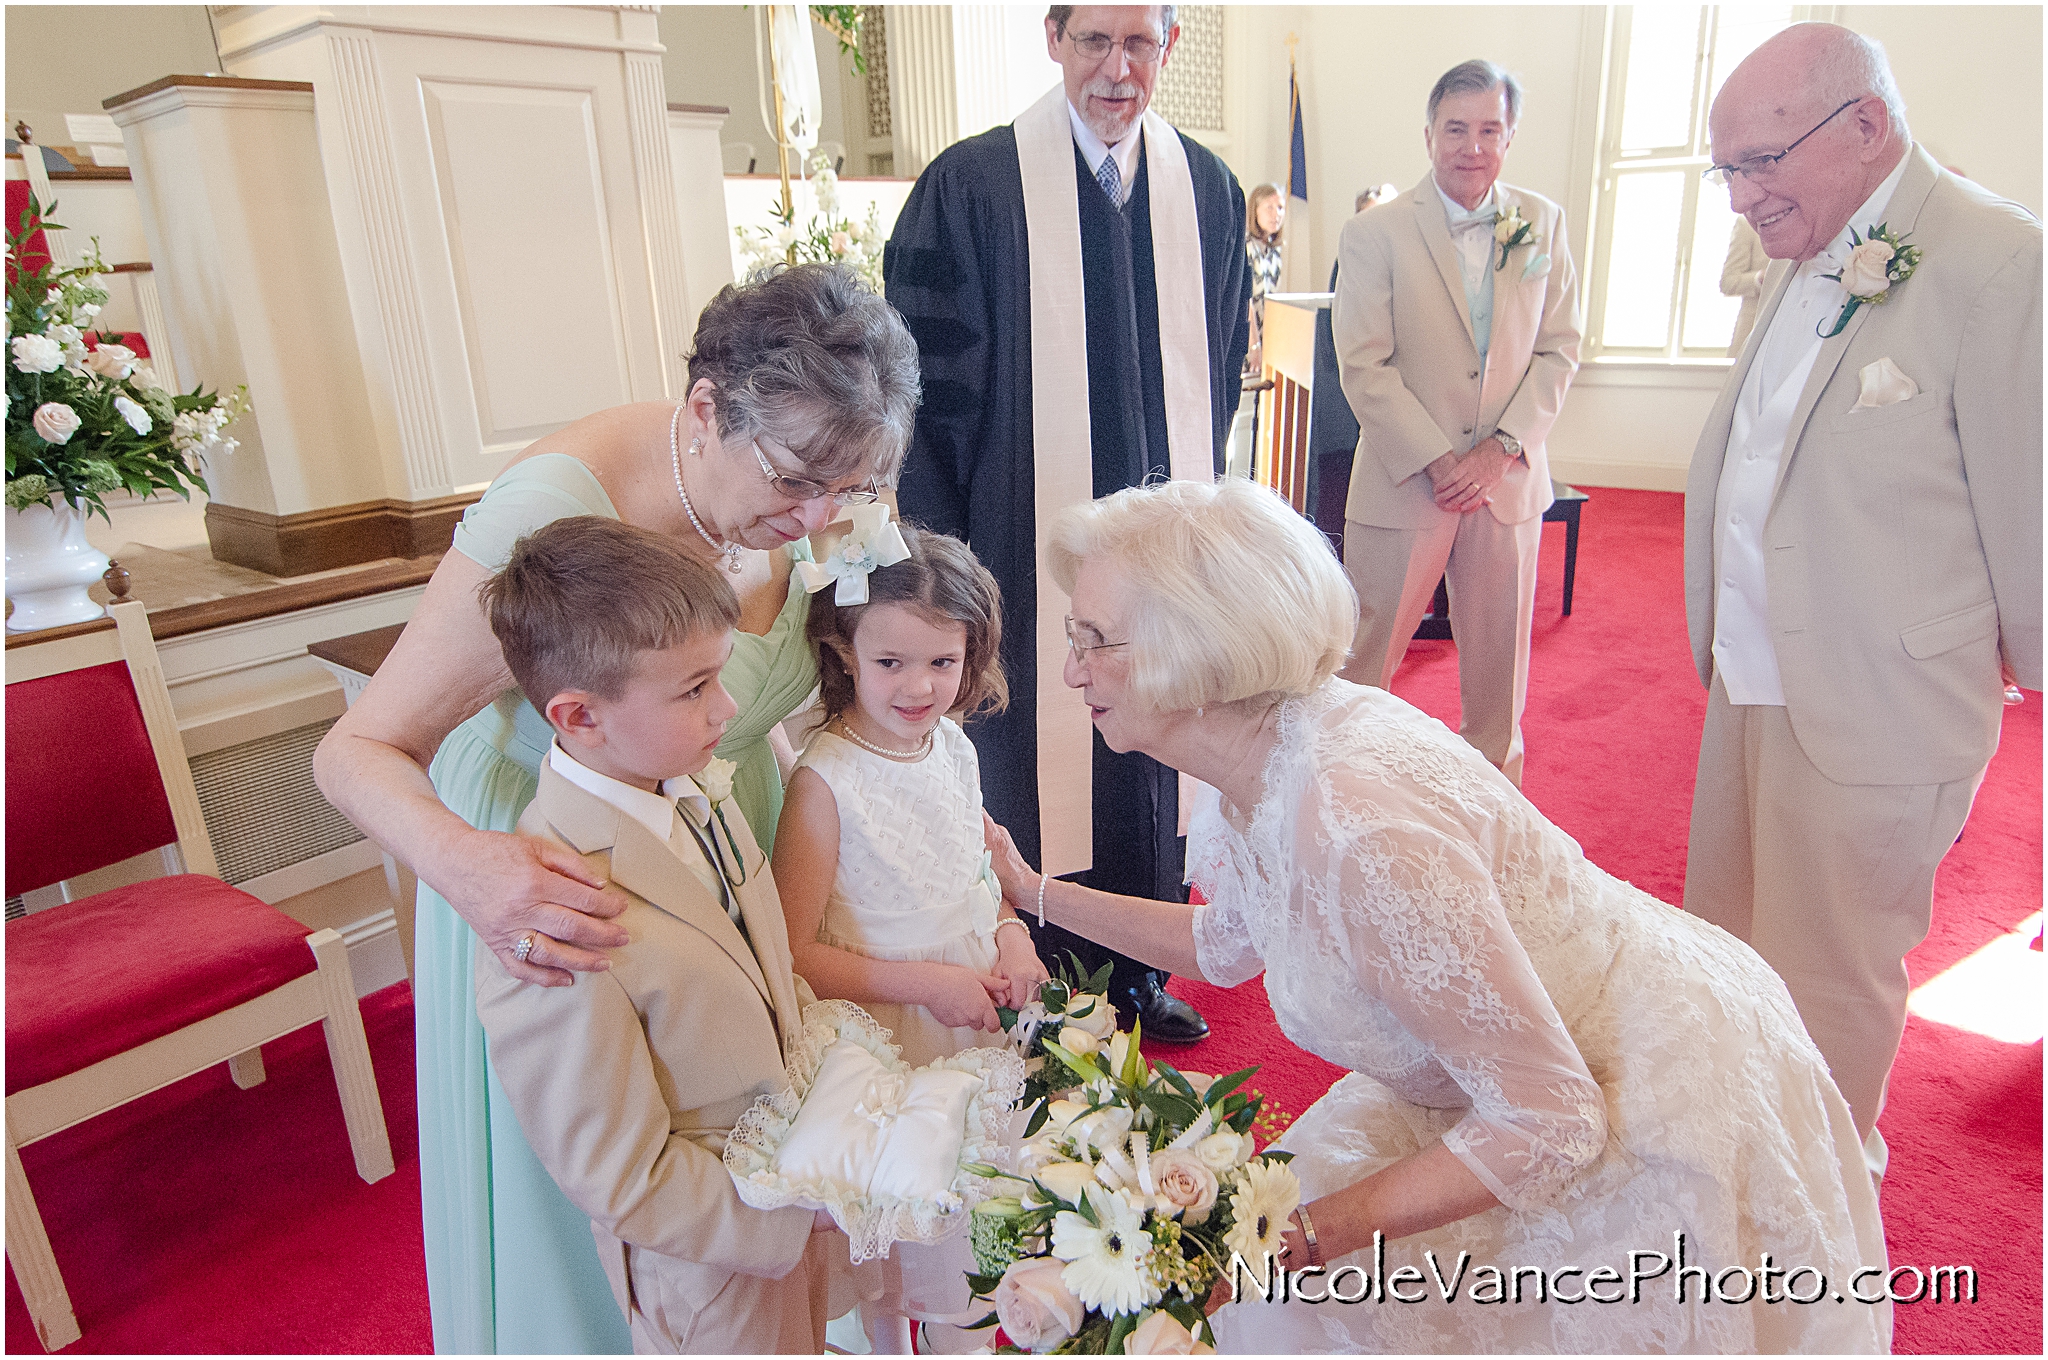 A tender moment between the bride and her child attendants